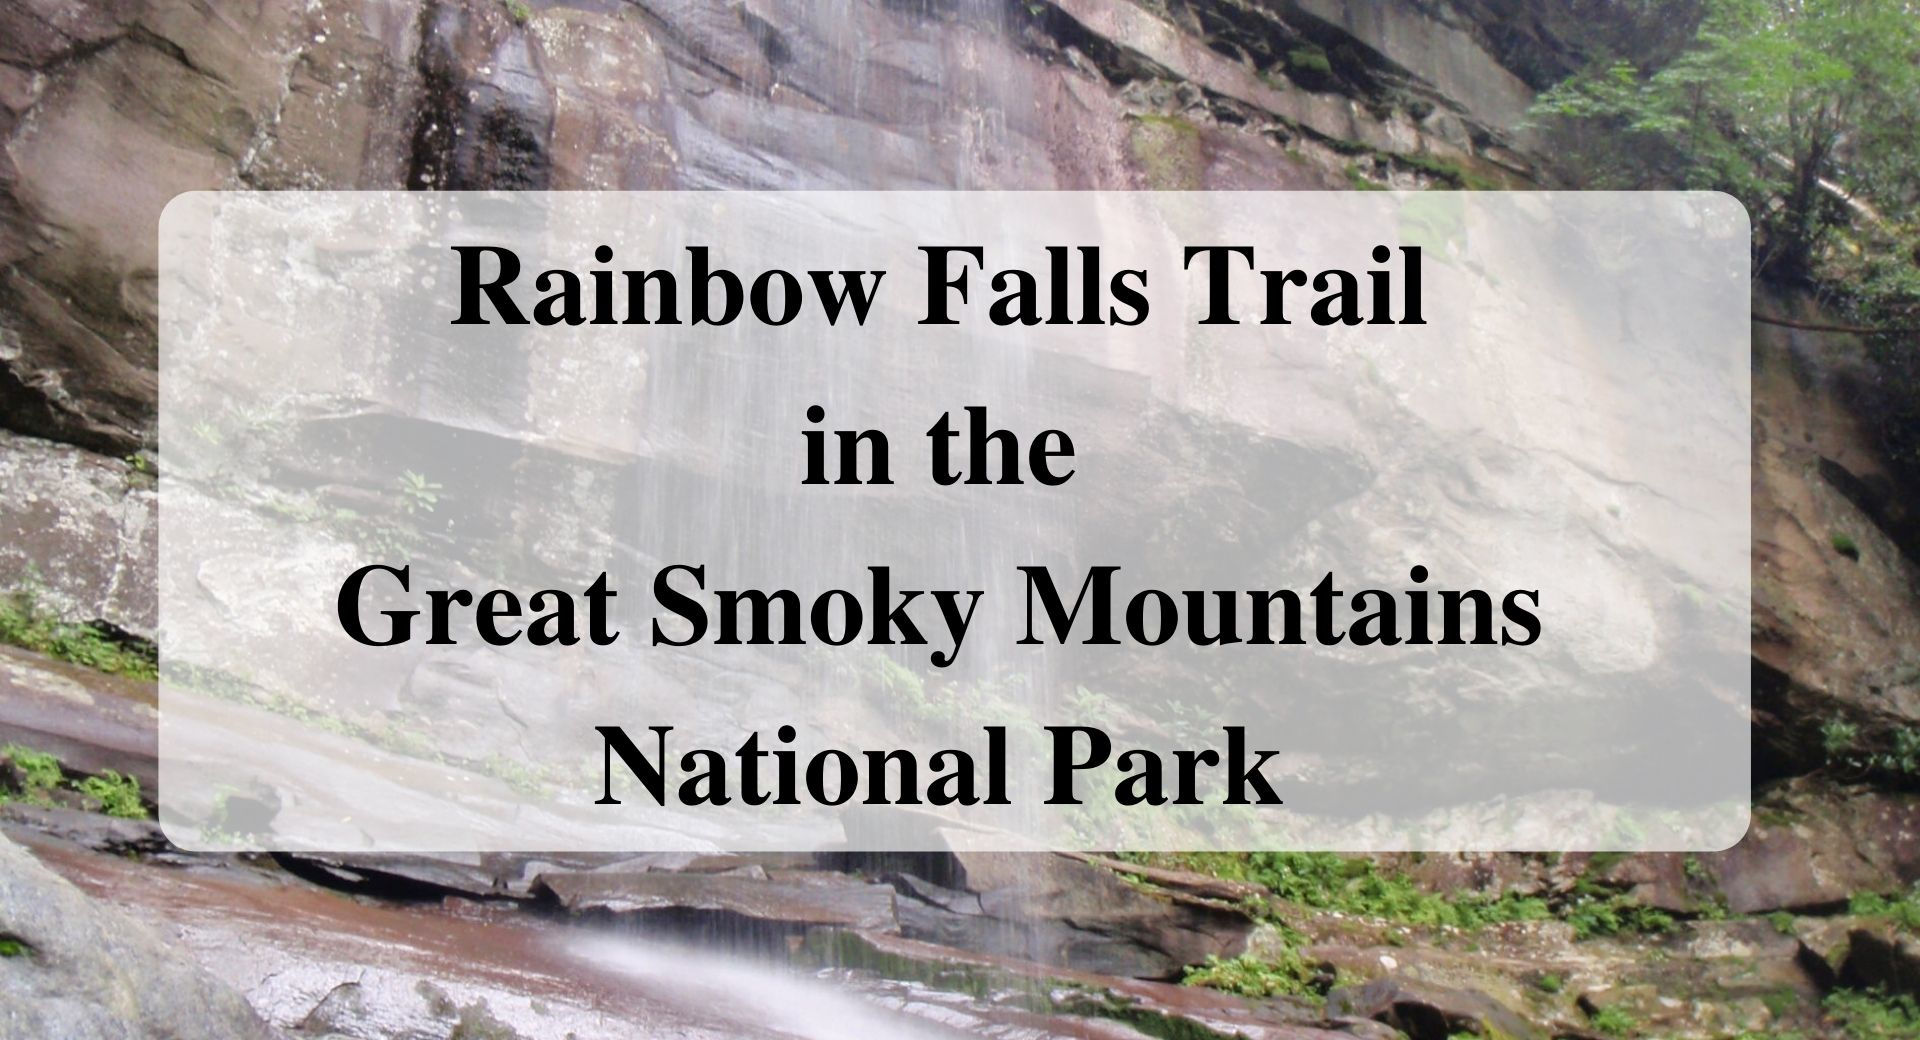 Rainbow Falls Trail in the Great Smoky Mountains National Park_ Forever_sabbatical